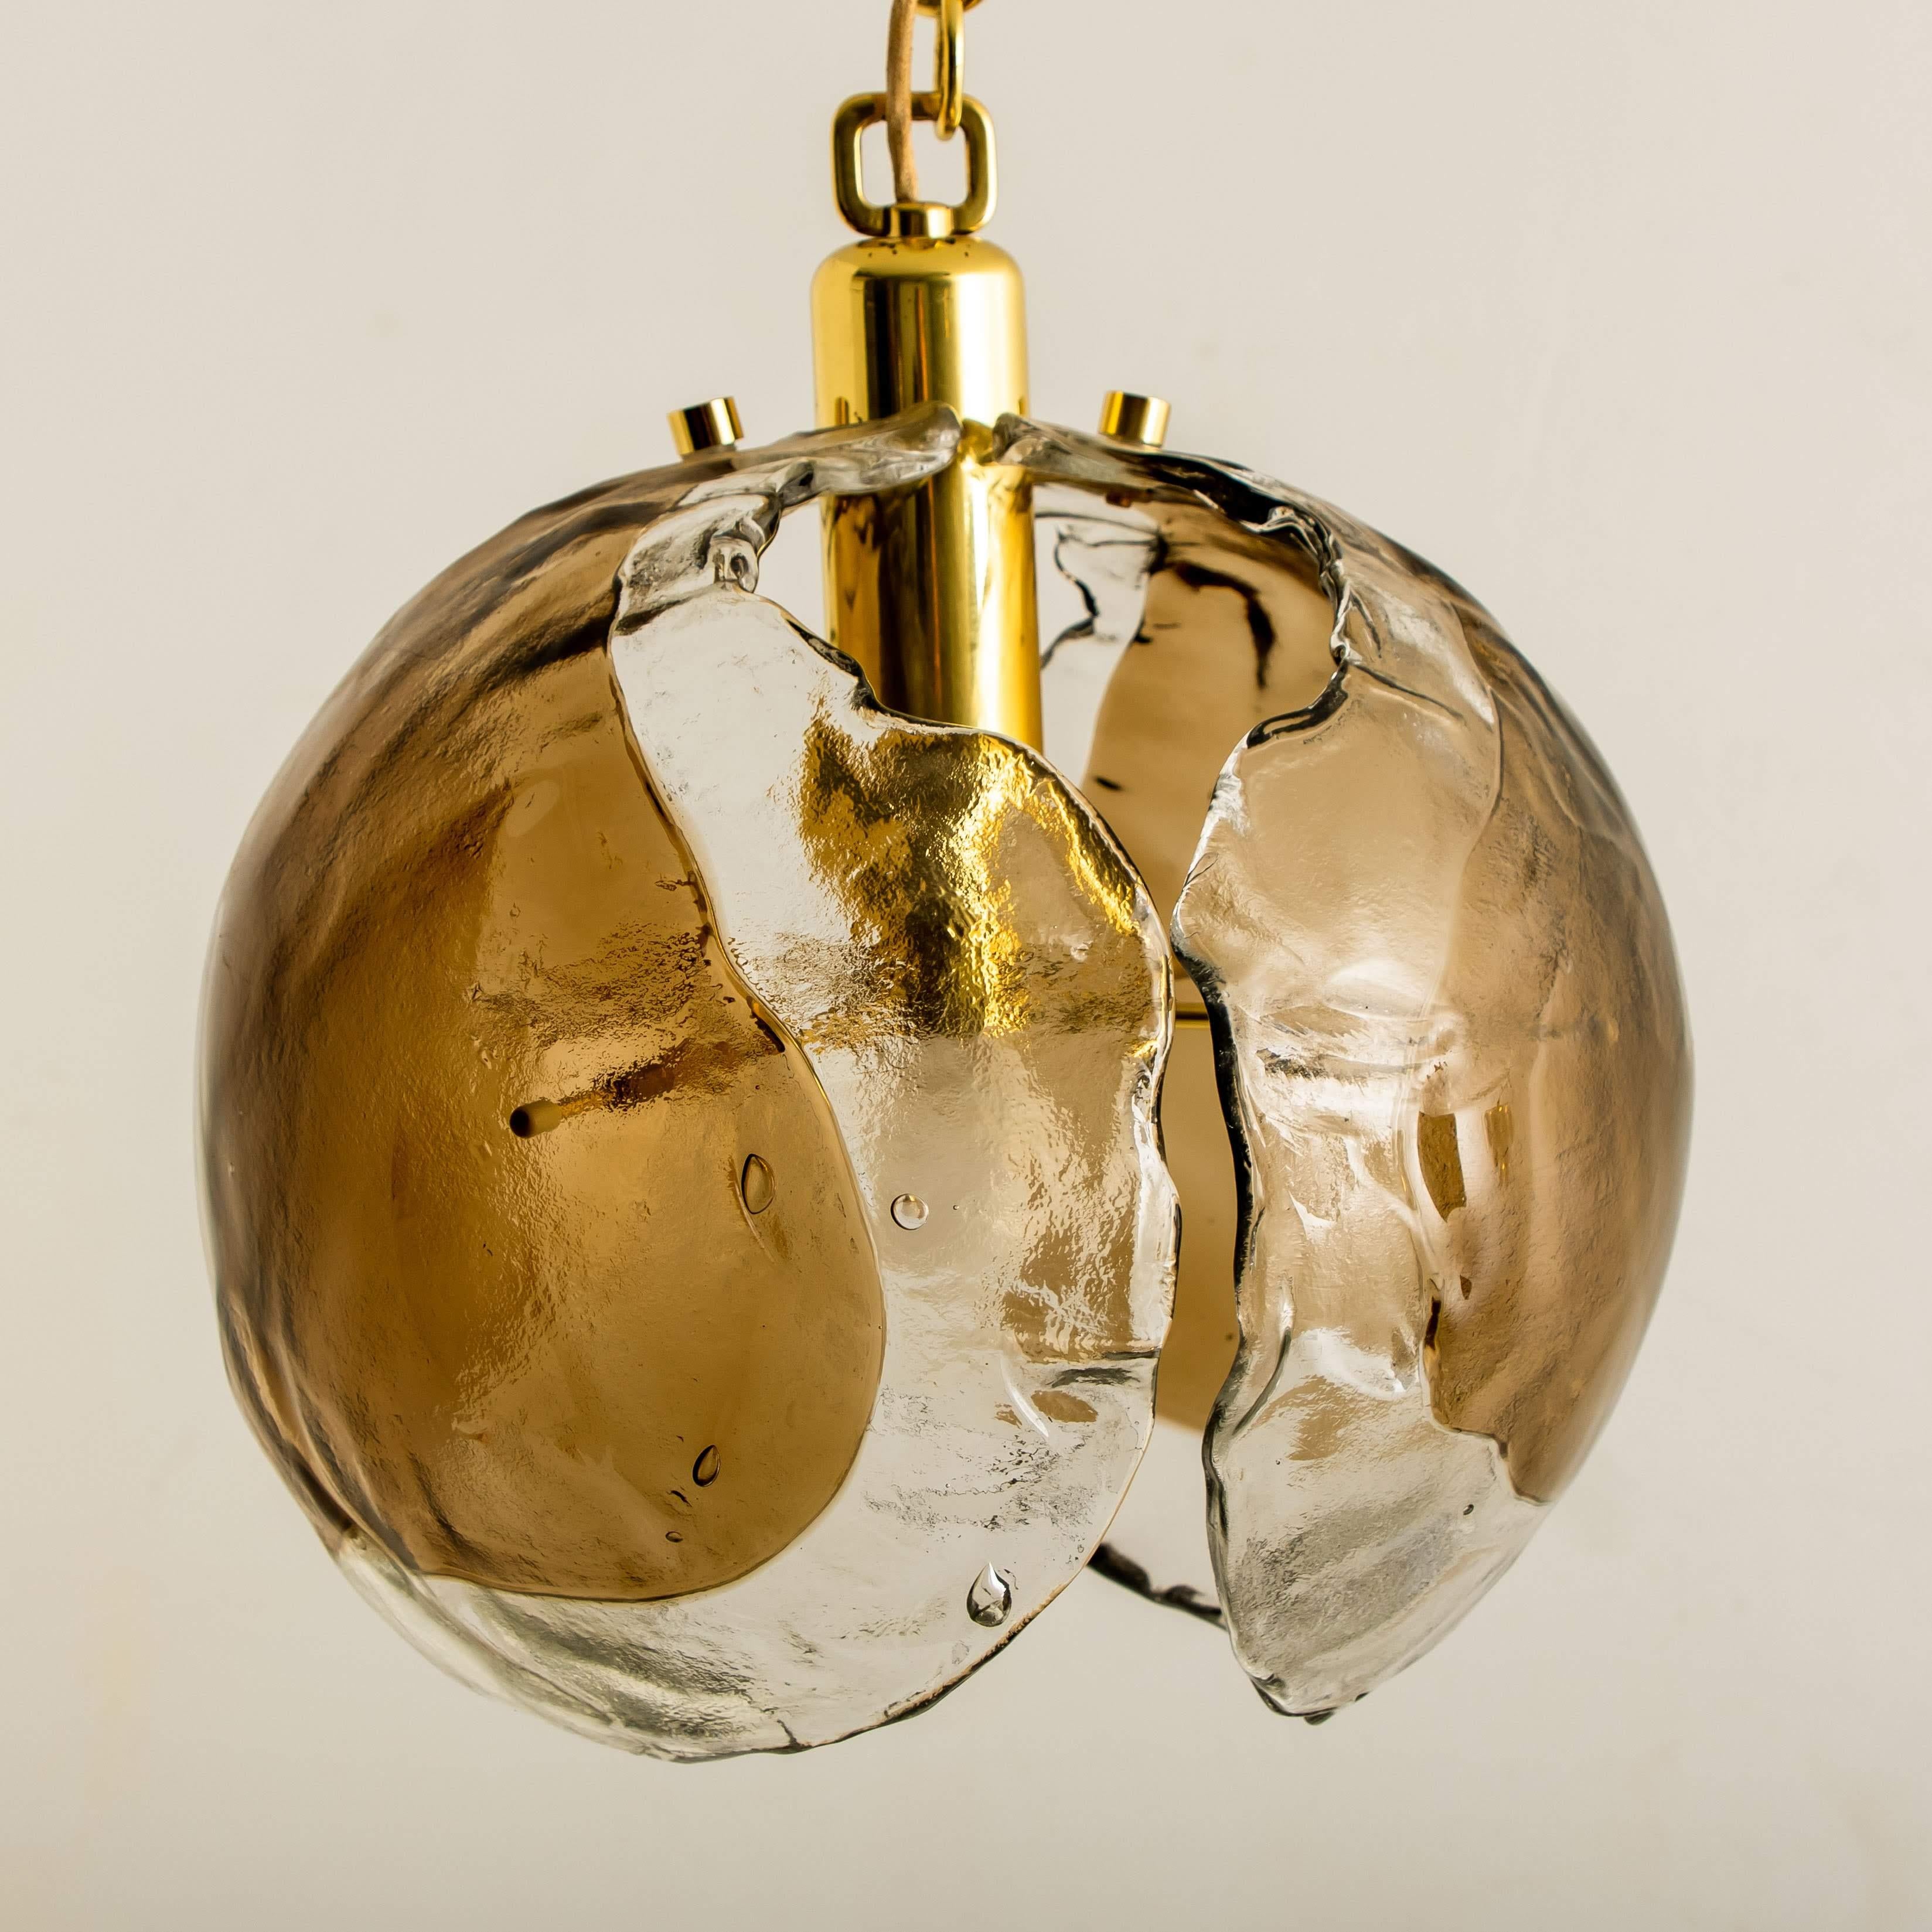 German 1 of the 3 Kalmar Chandelier Pendant Lights, Smoked Glass and Brass, 1970s